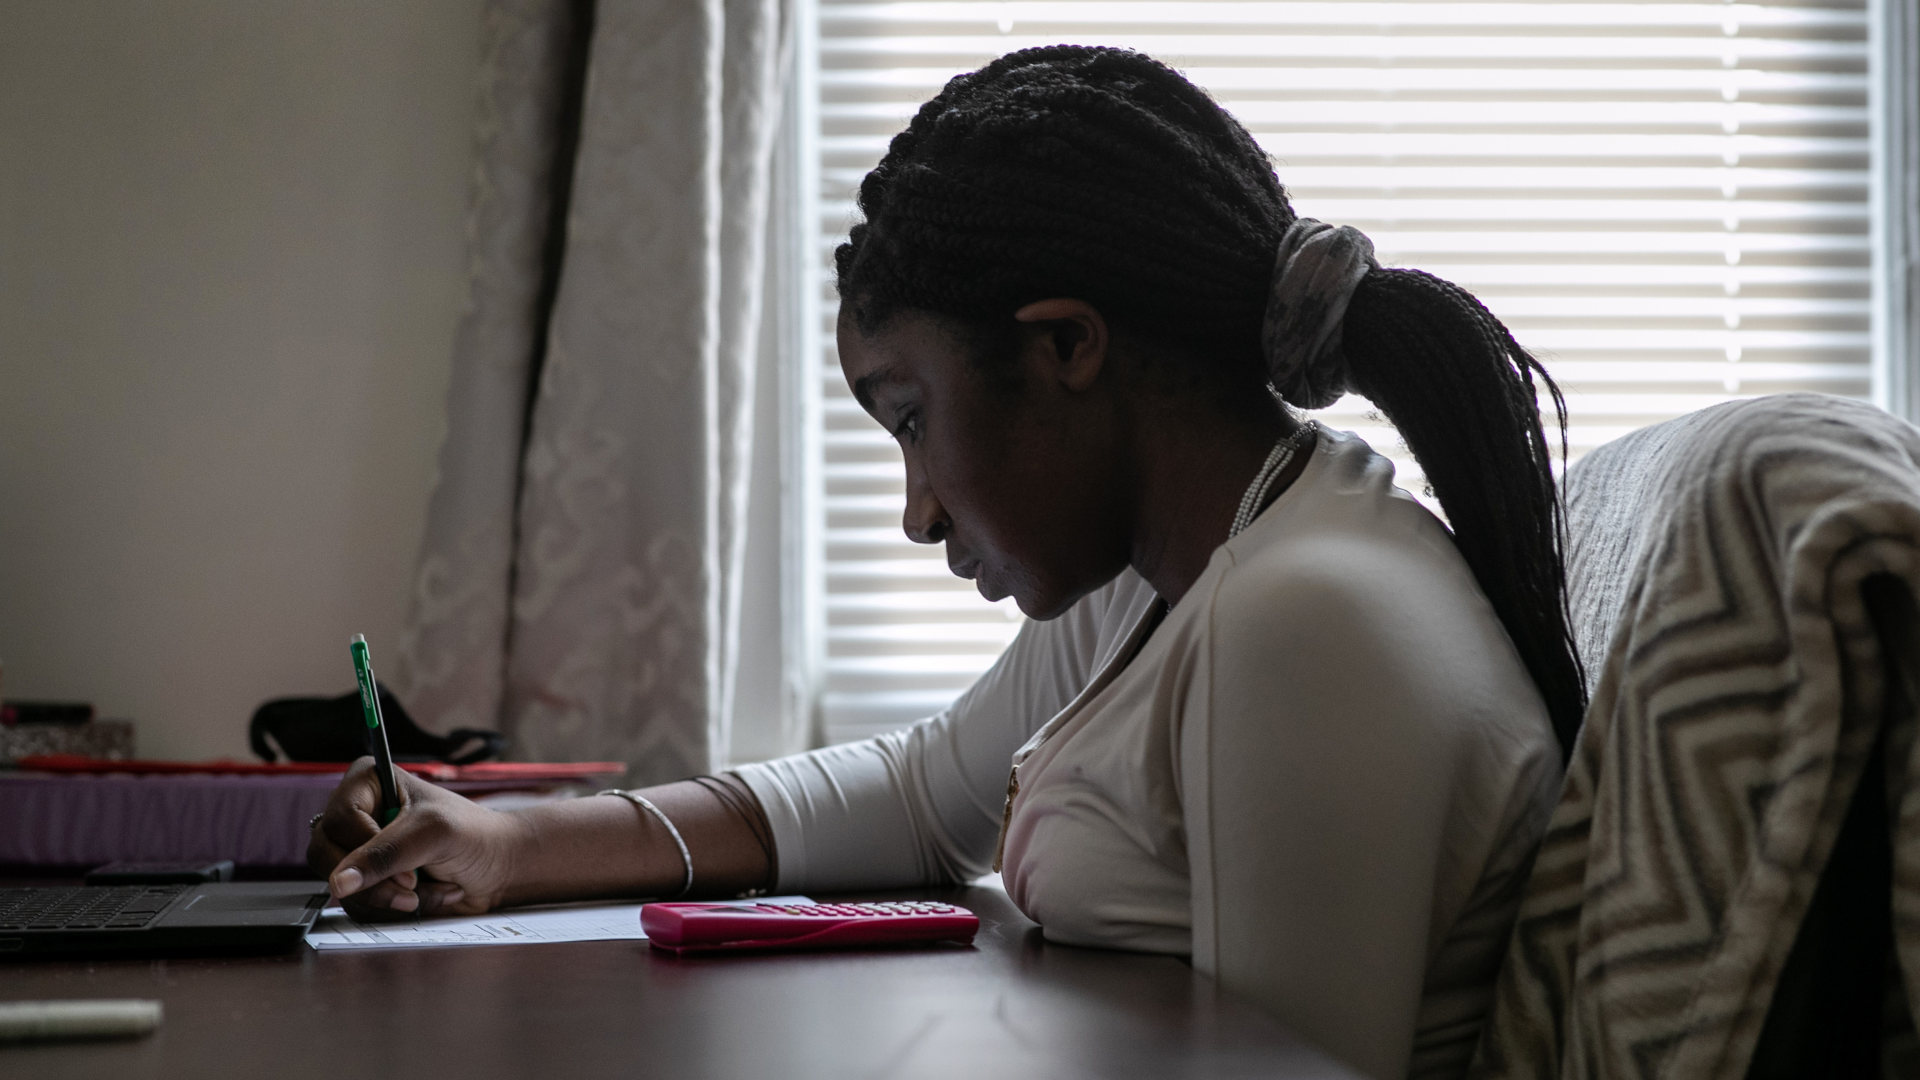 Abigail Previlon, 13, takes part in online learning at home on October 28, 2020 in Stamford, Connecticut. At the time, Stamford Public Schools was using a hybrid educational model due to the Covid-19 pandemic.